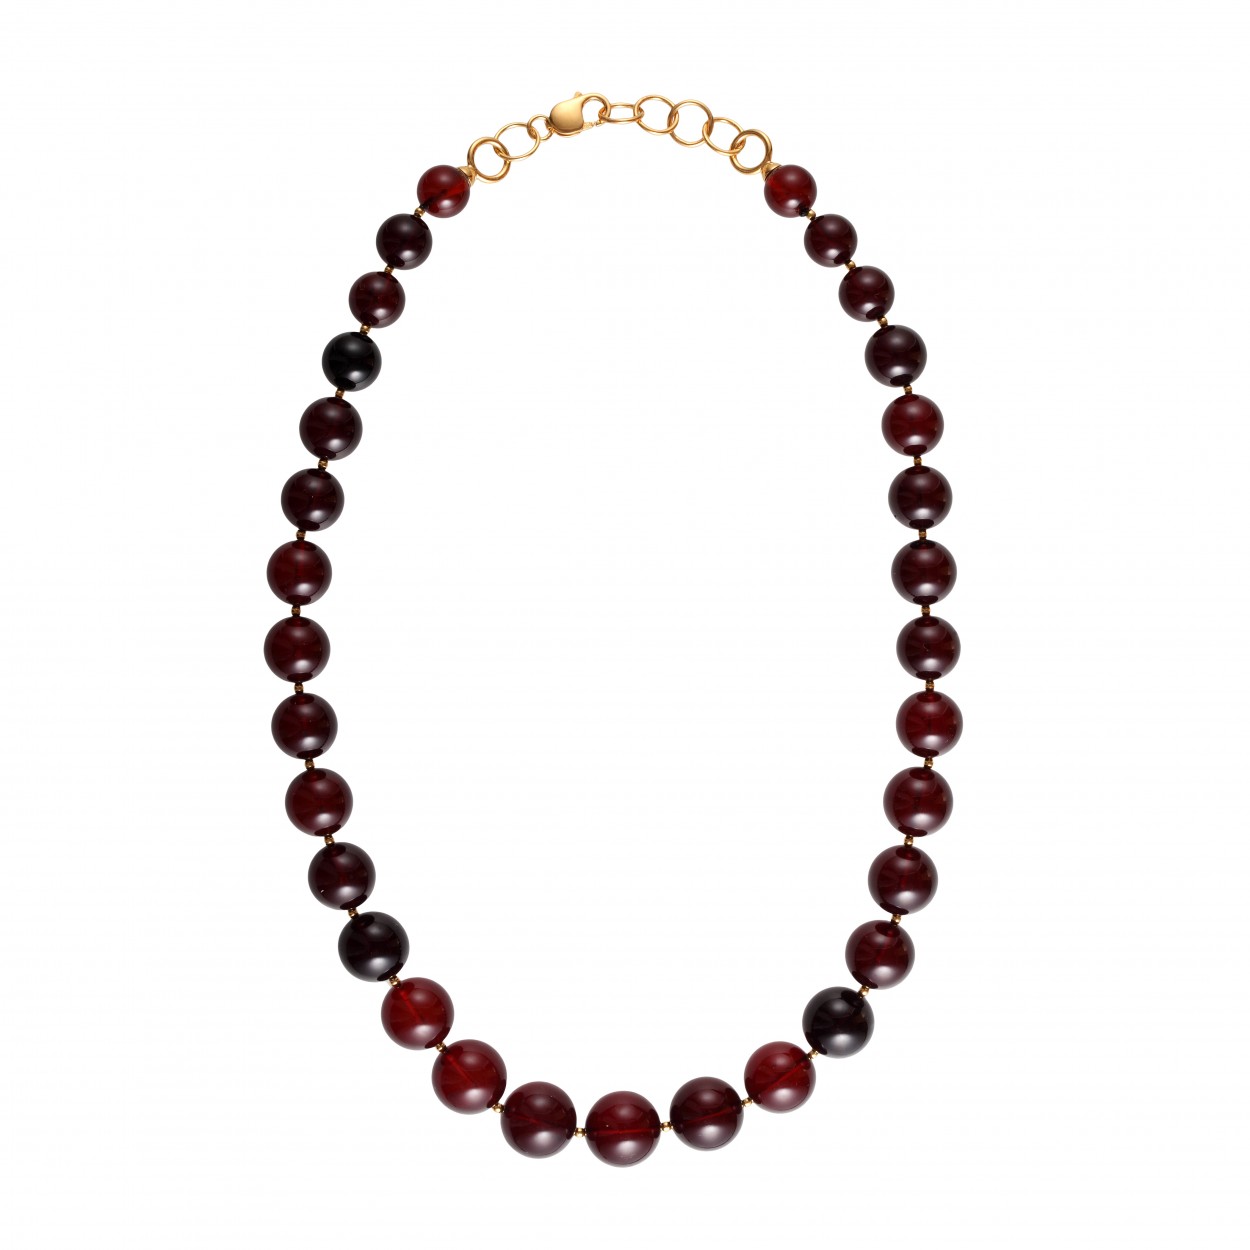  Classical Beads Amber Necklace